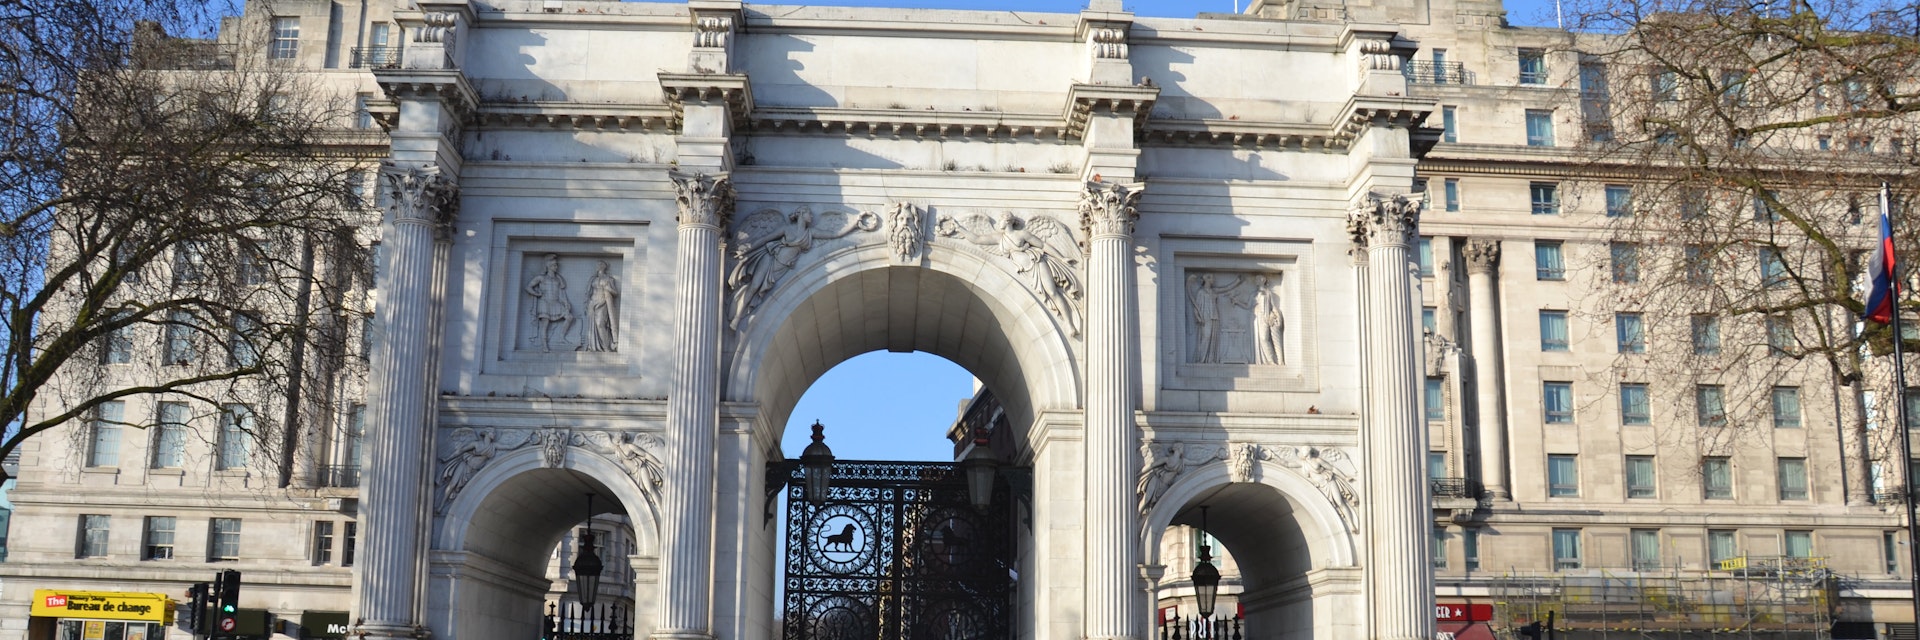 Built in 1828, Marble Arch is located in the northeast corner of Hyde Park, otherwise known as Speakers' Corner